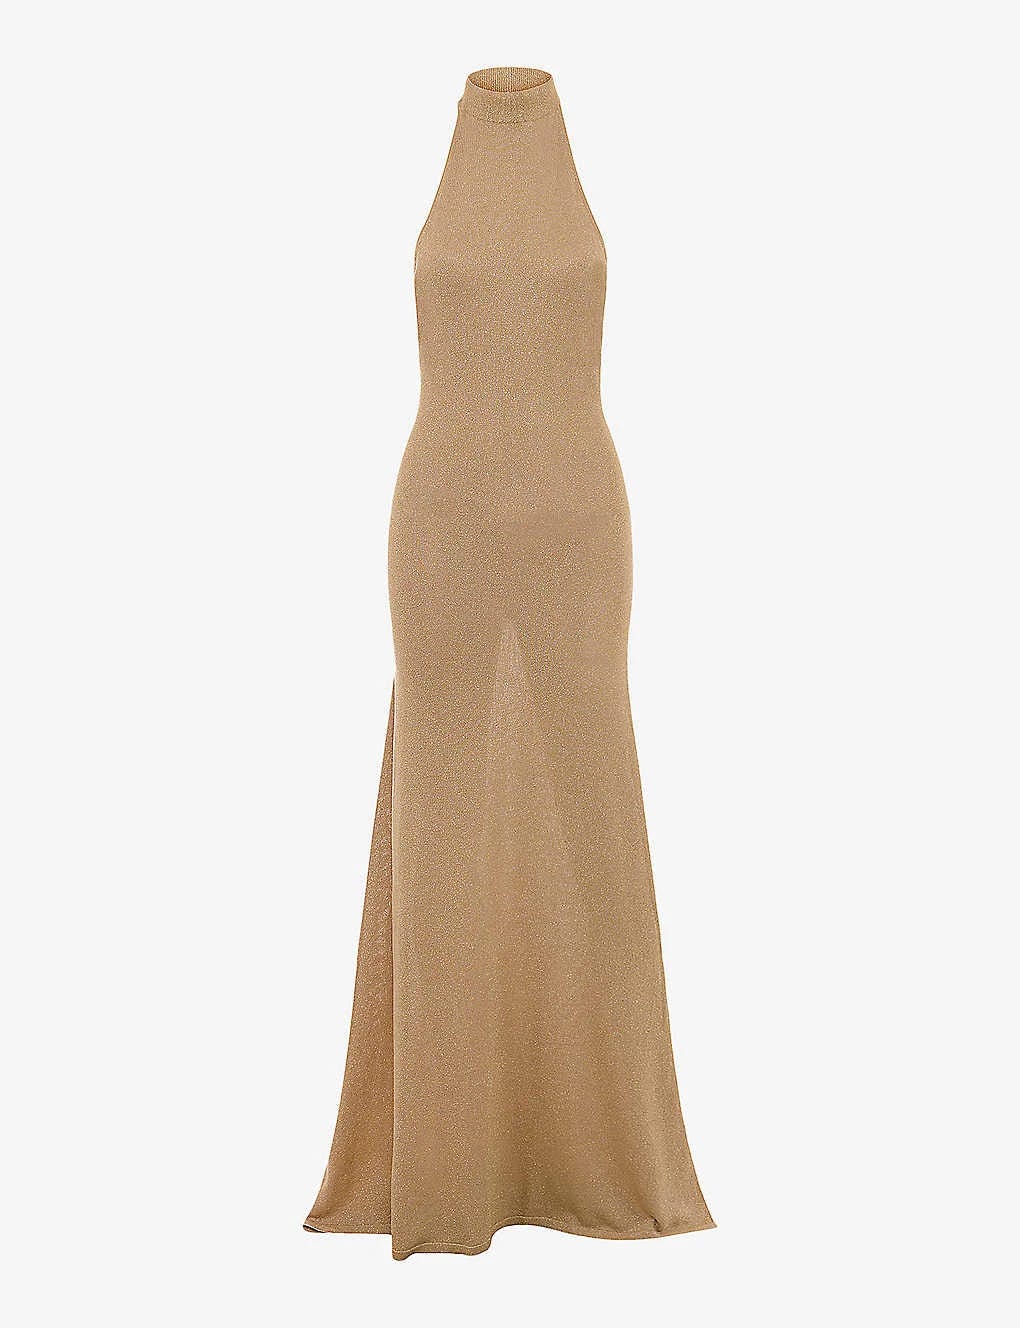 Shimmering Gold Metallic Gown | Image